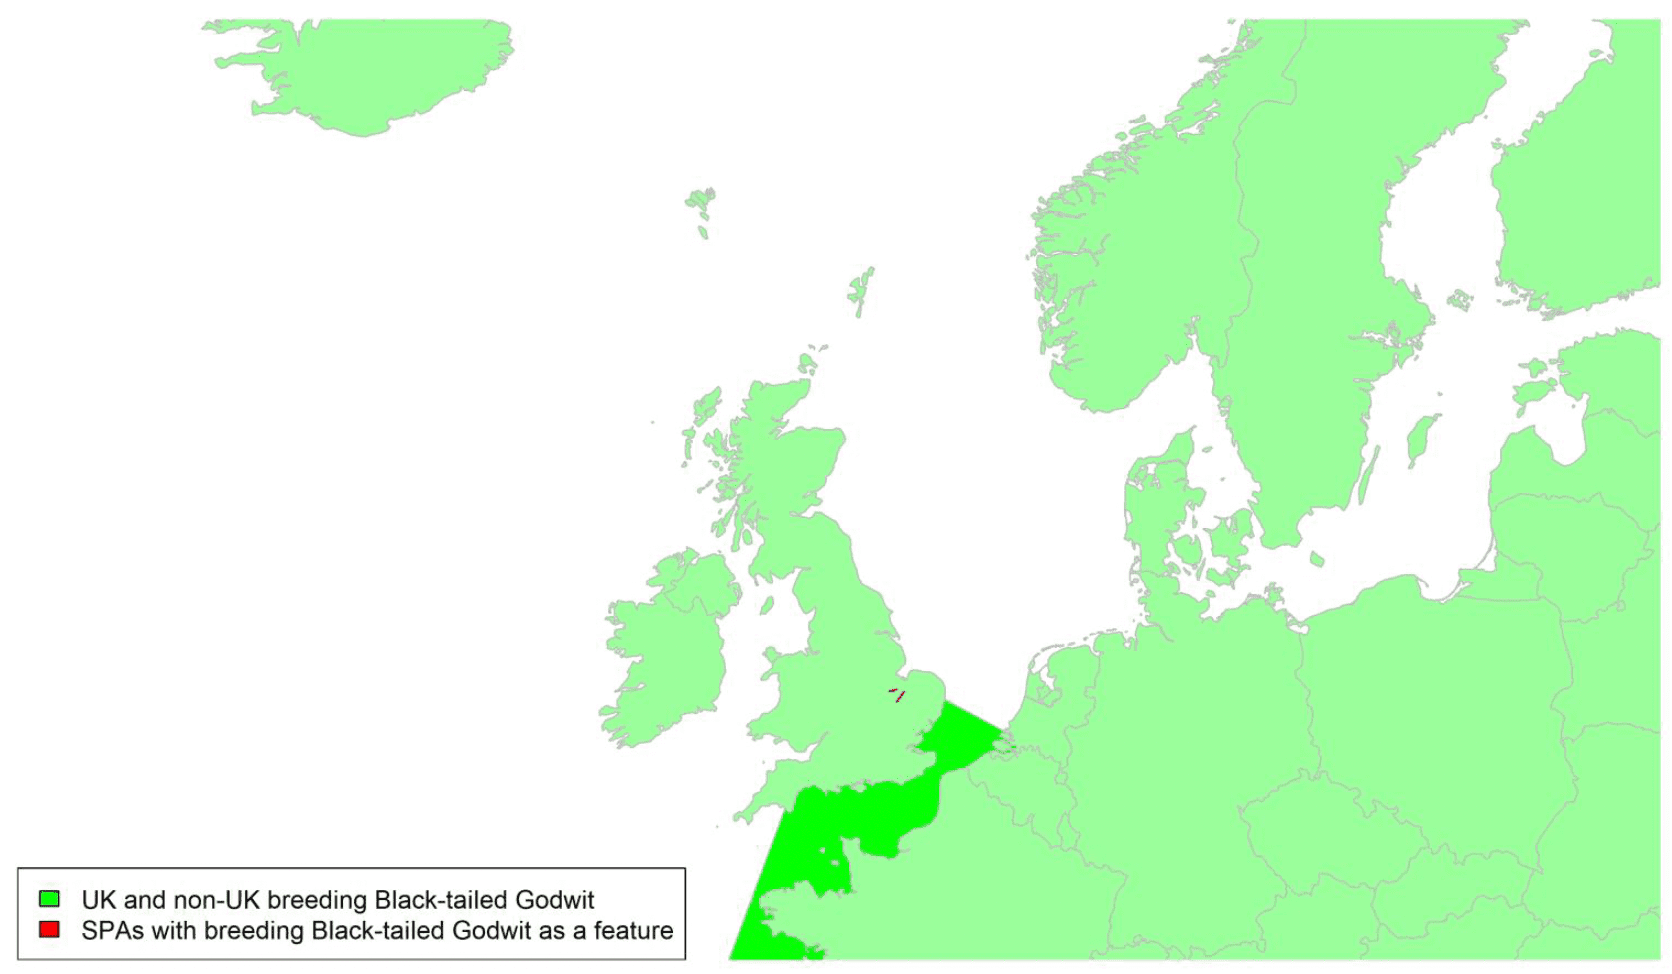 Map of North West Europe showing migratory routes and SPAs within the UK for breeding Black-tailed Godwit as described in the text below.